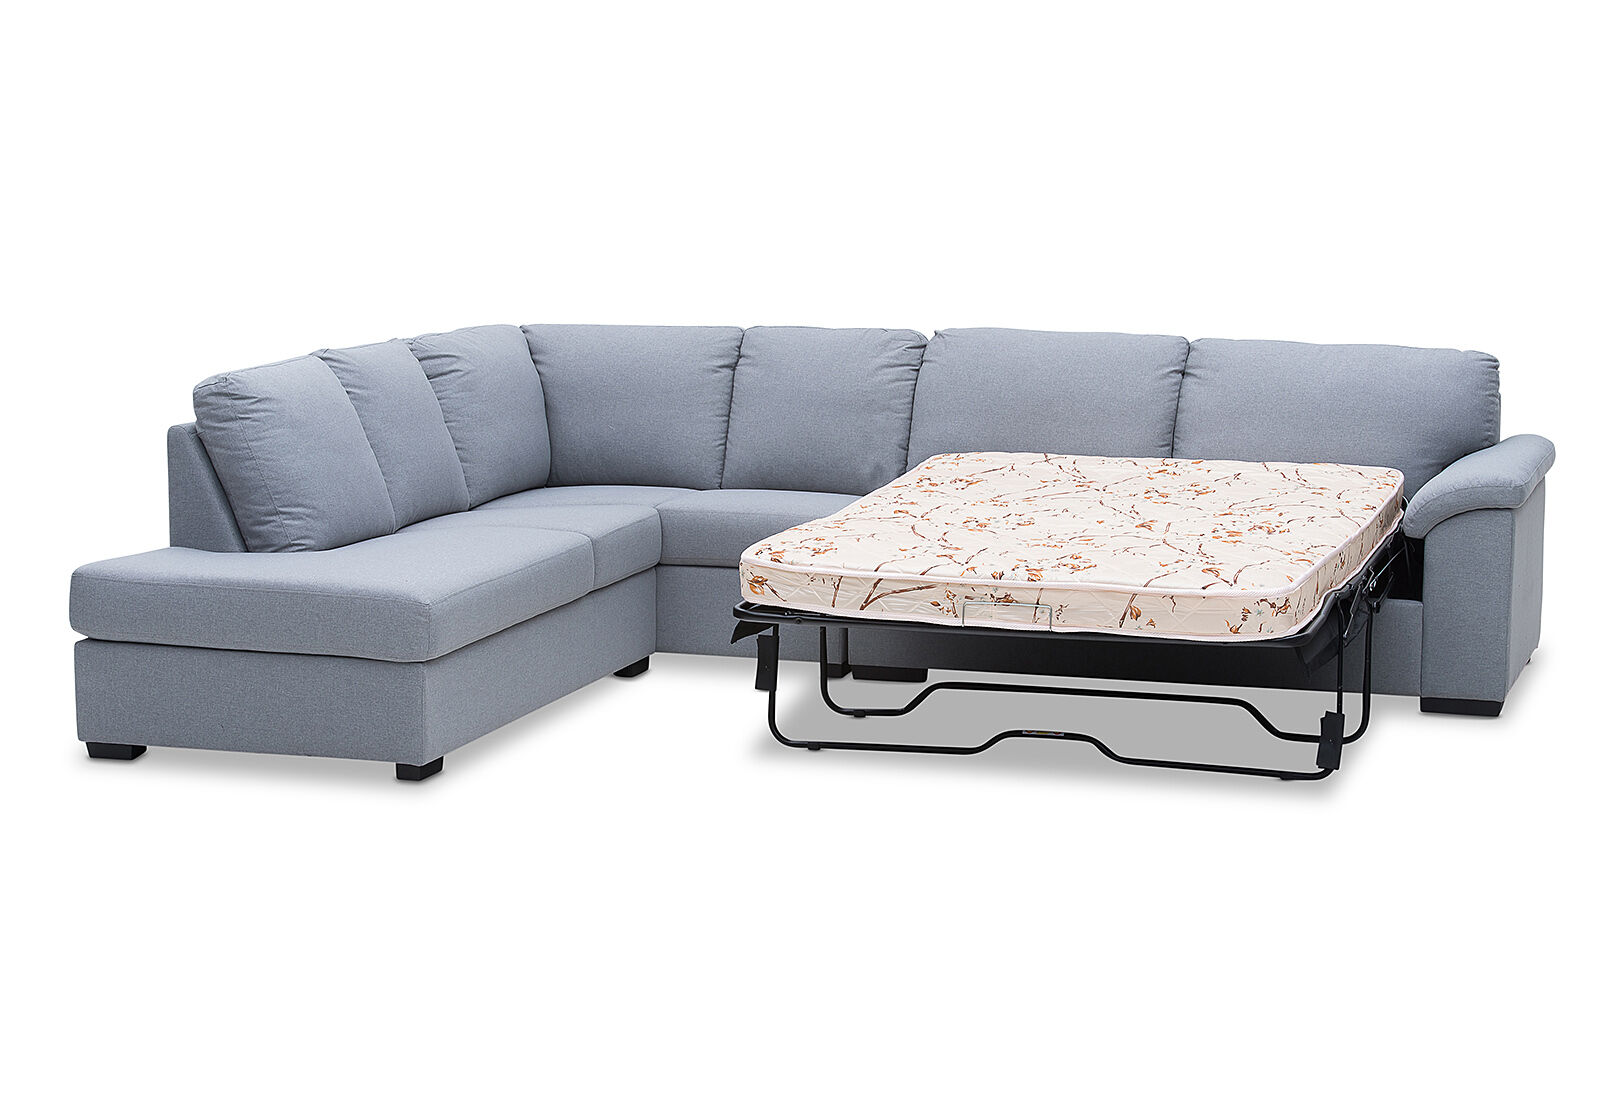 amart sofa bed review